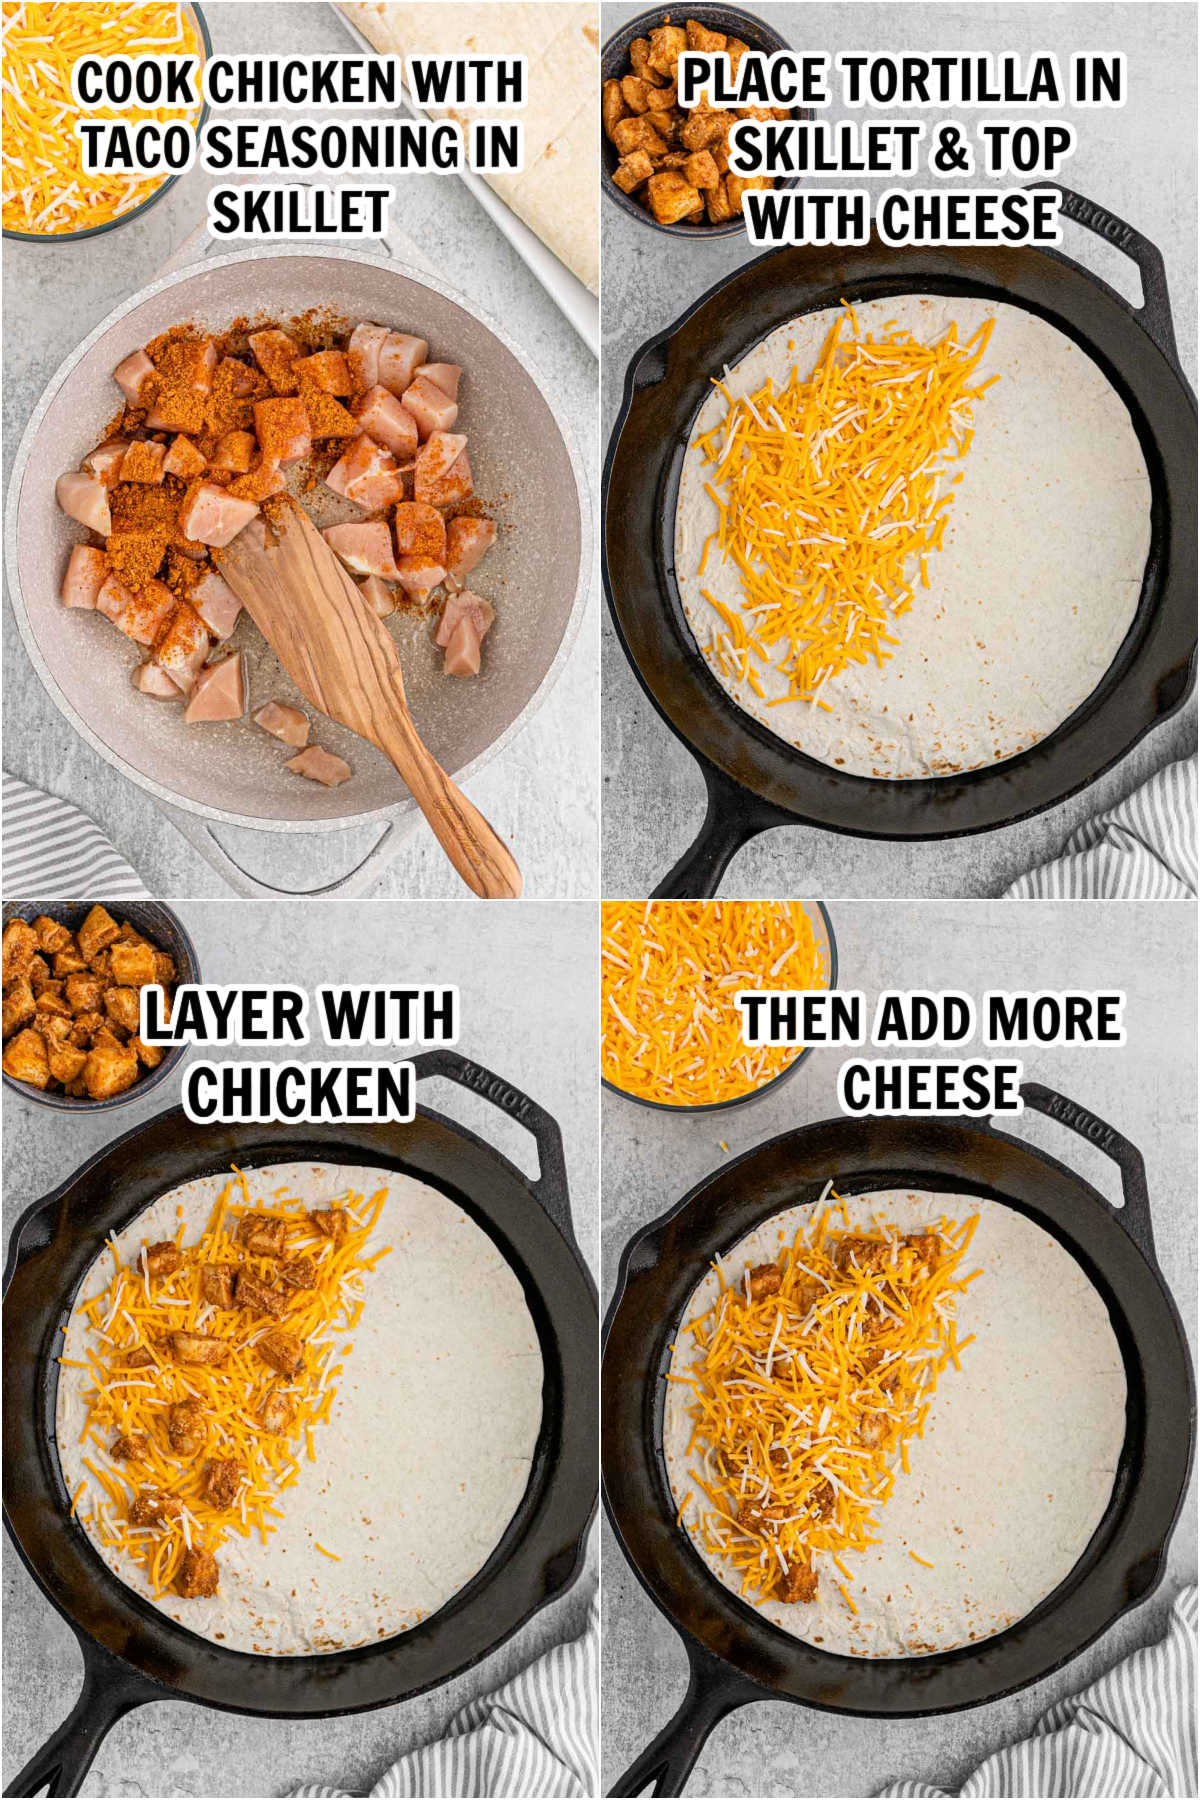 The process of topping the tortilla with chicken and cheese